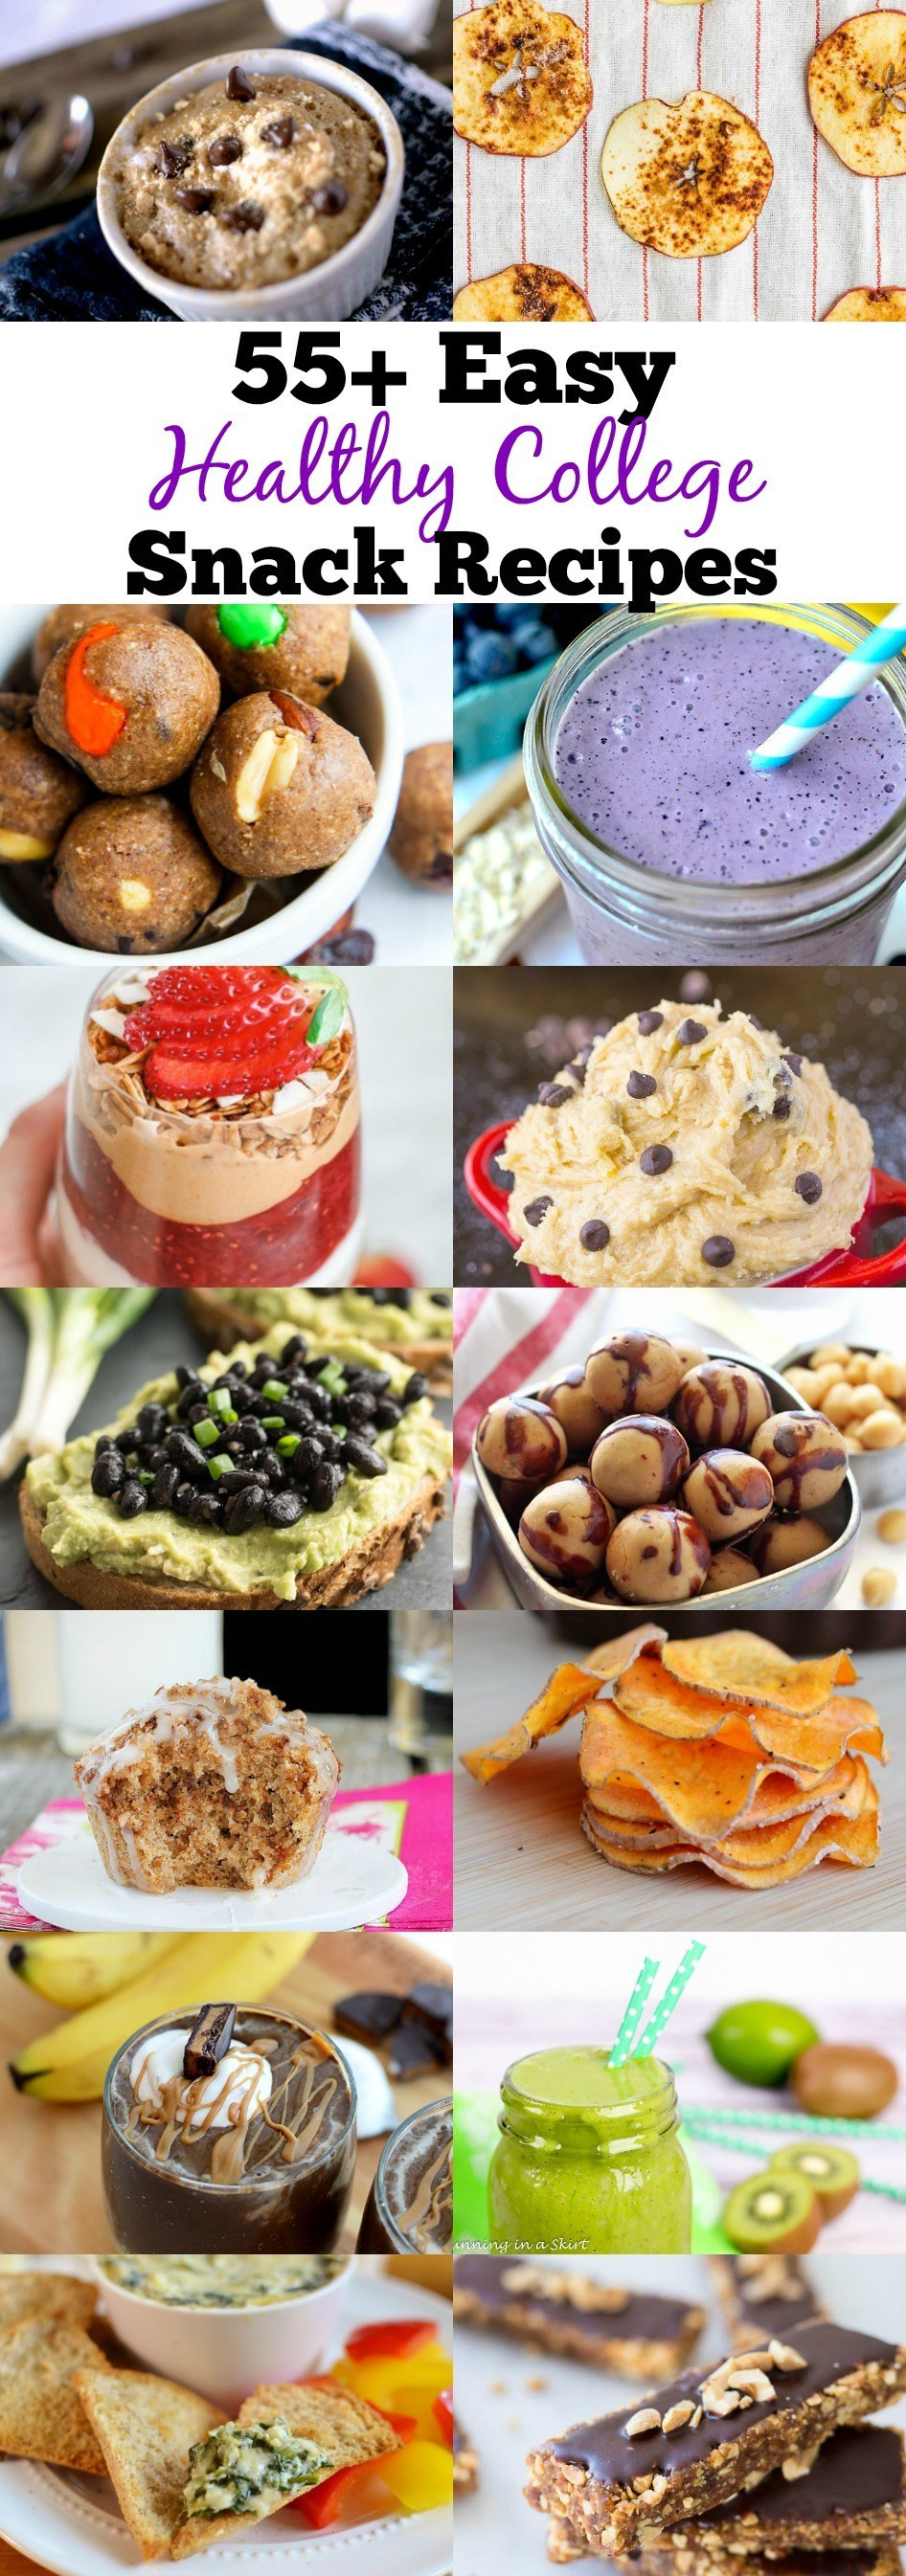 Healthy College Snacks For The Dorm
 55 Healthy College Snack Recipes That Can Be Made In a